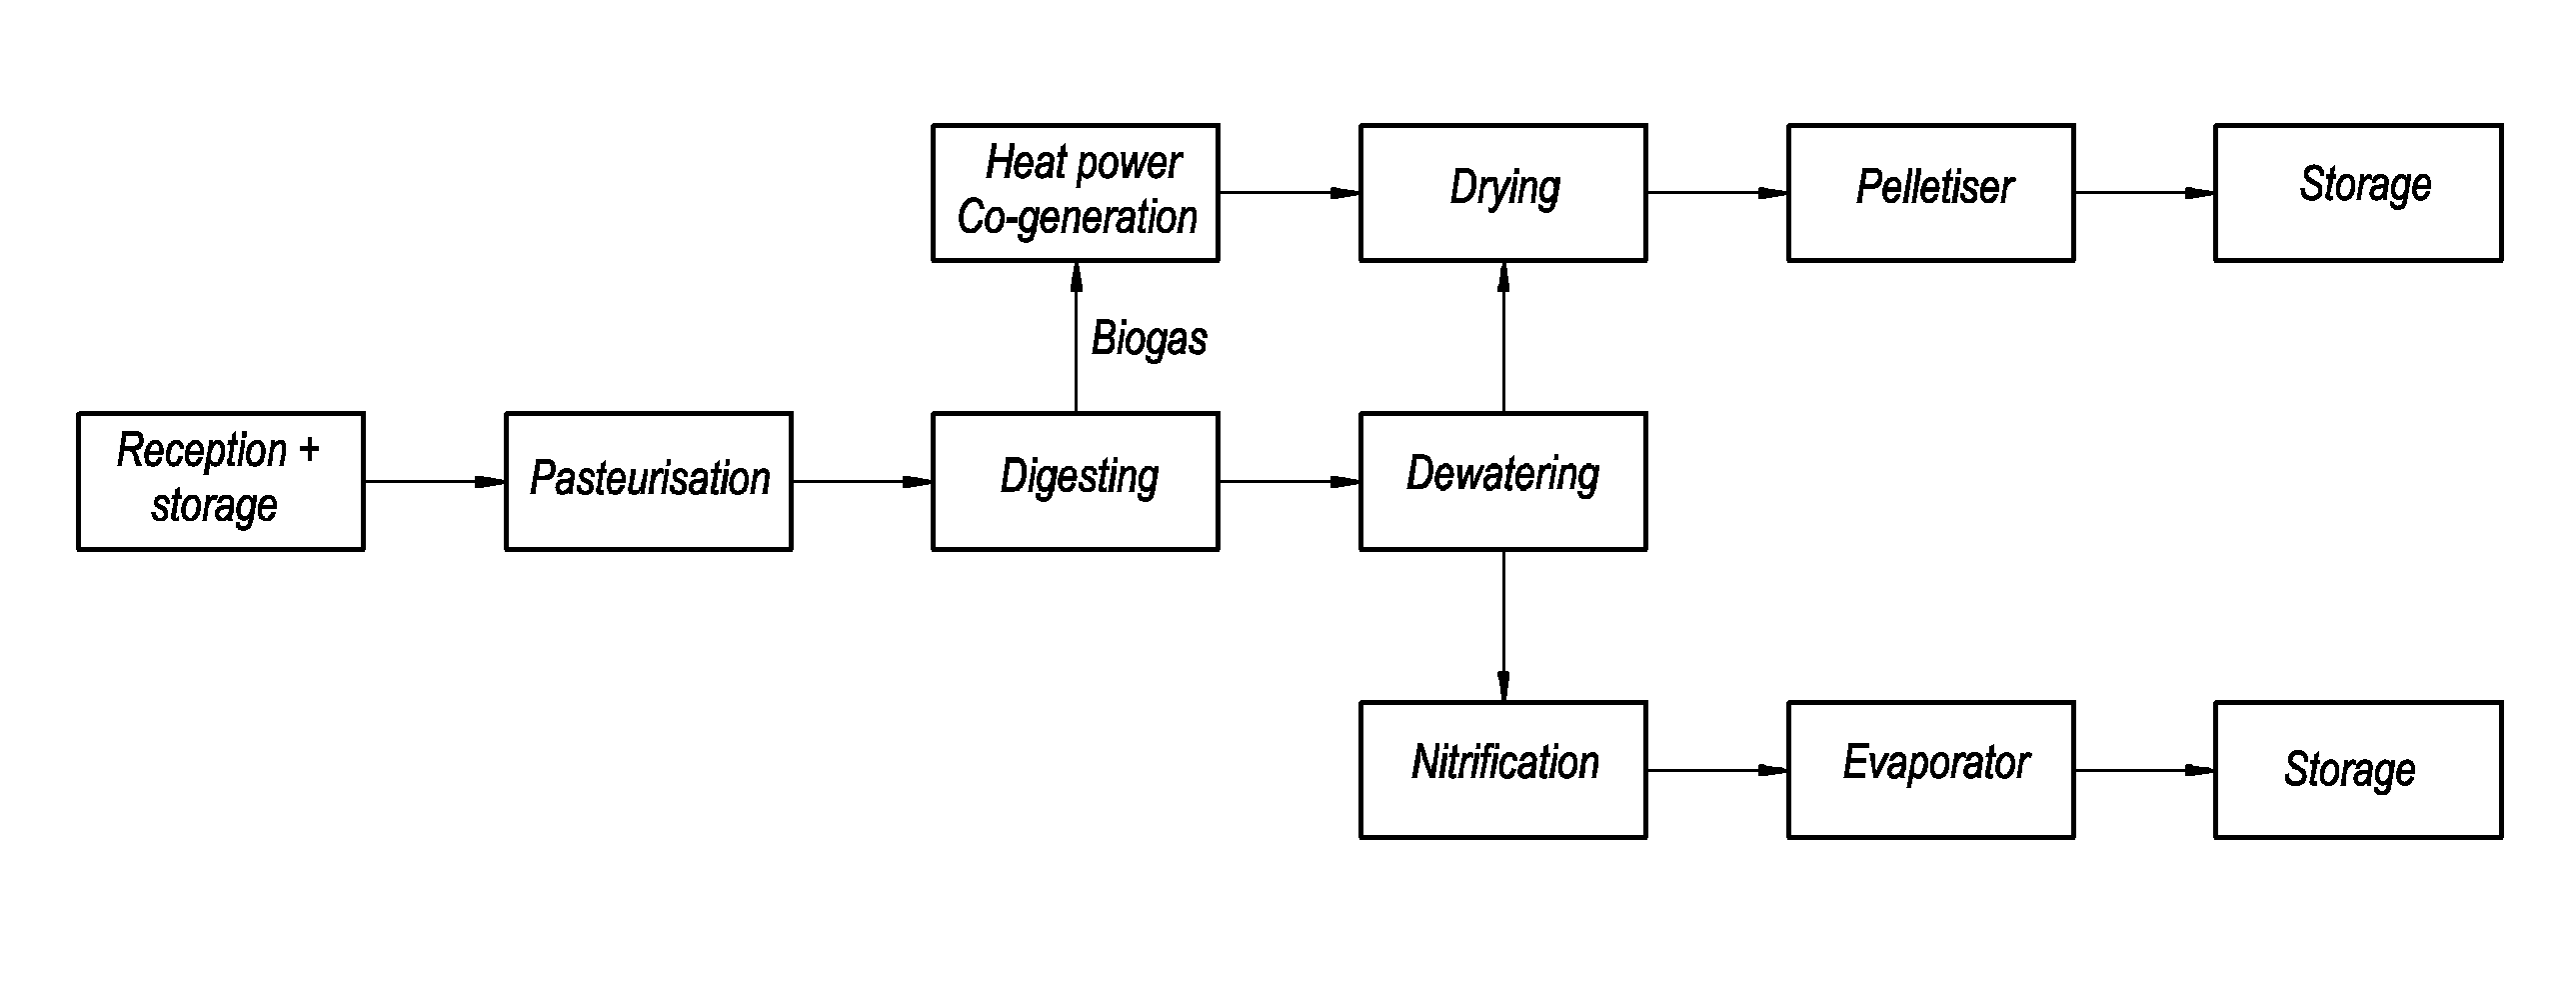 Process for the conversion of liquid waste biomass into a fertilizer product